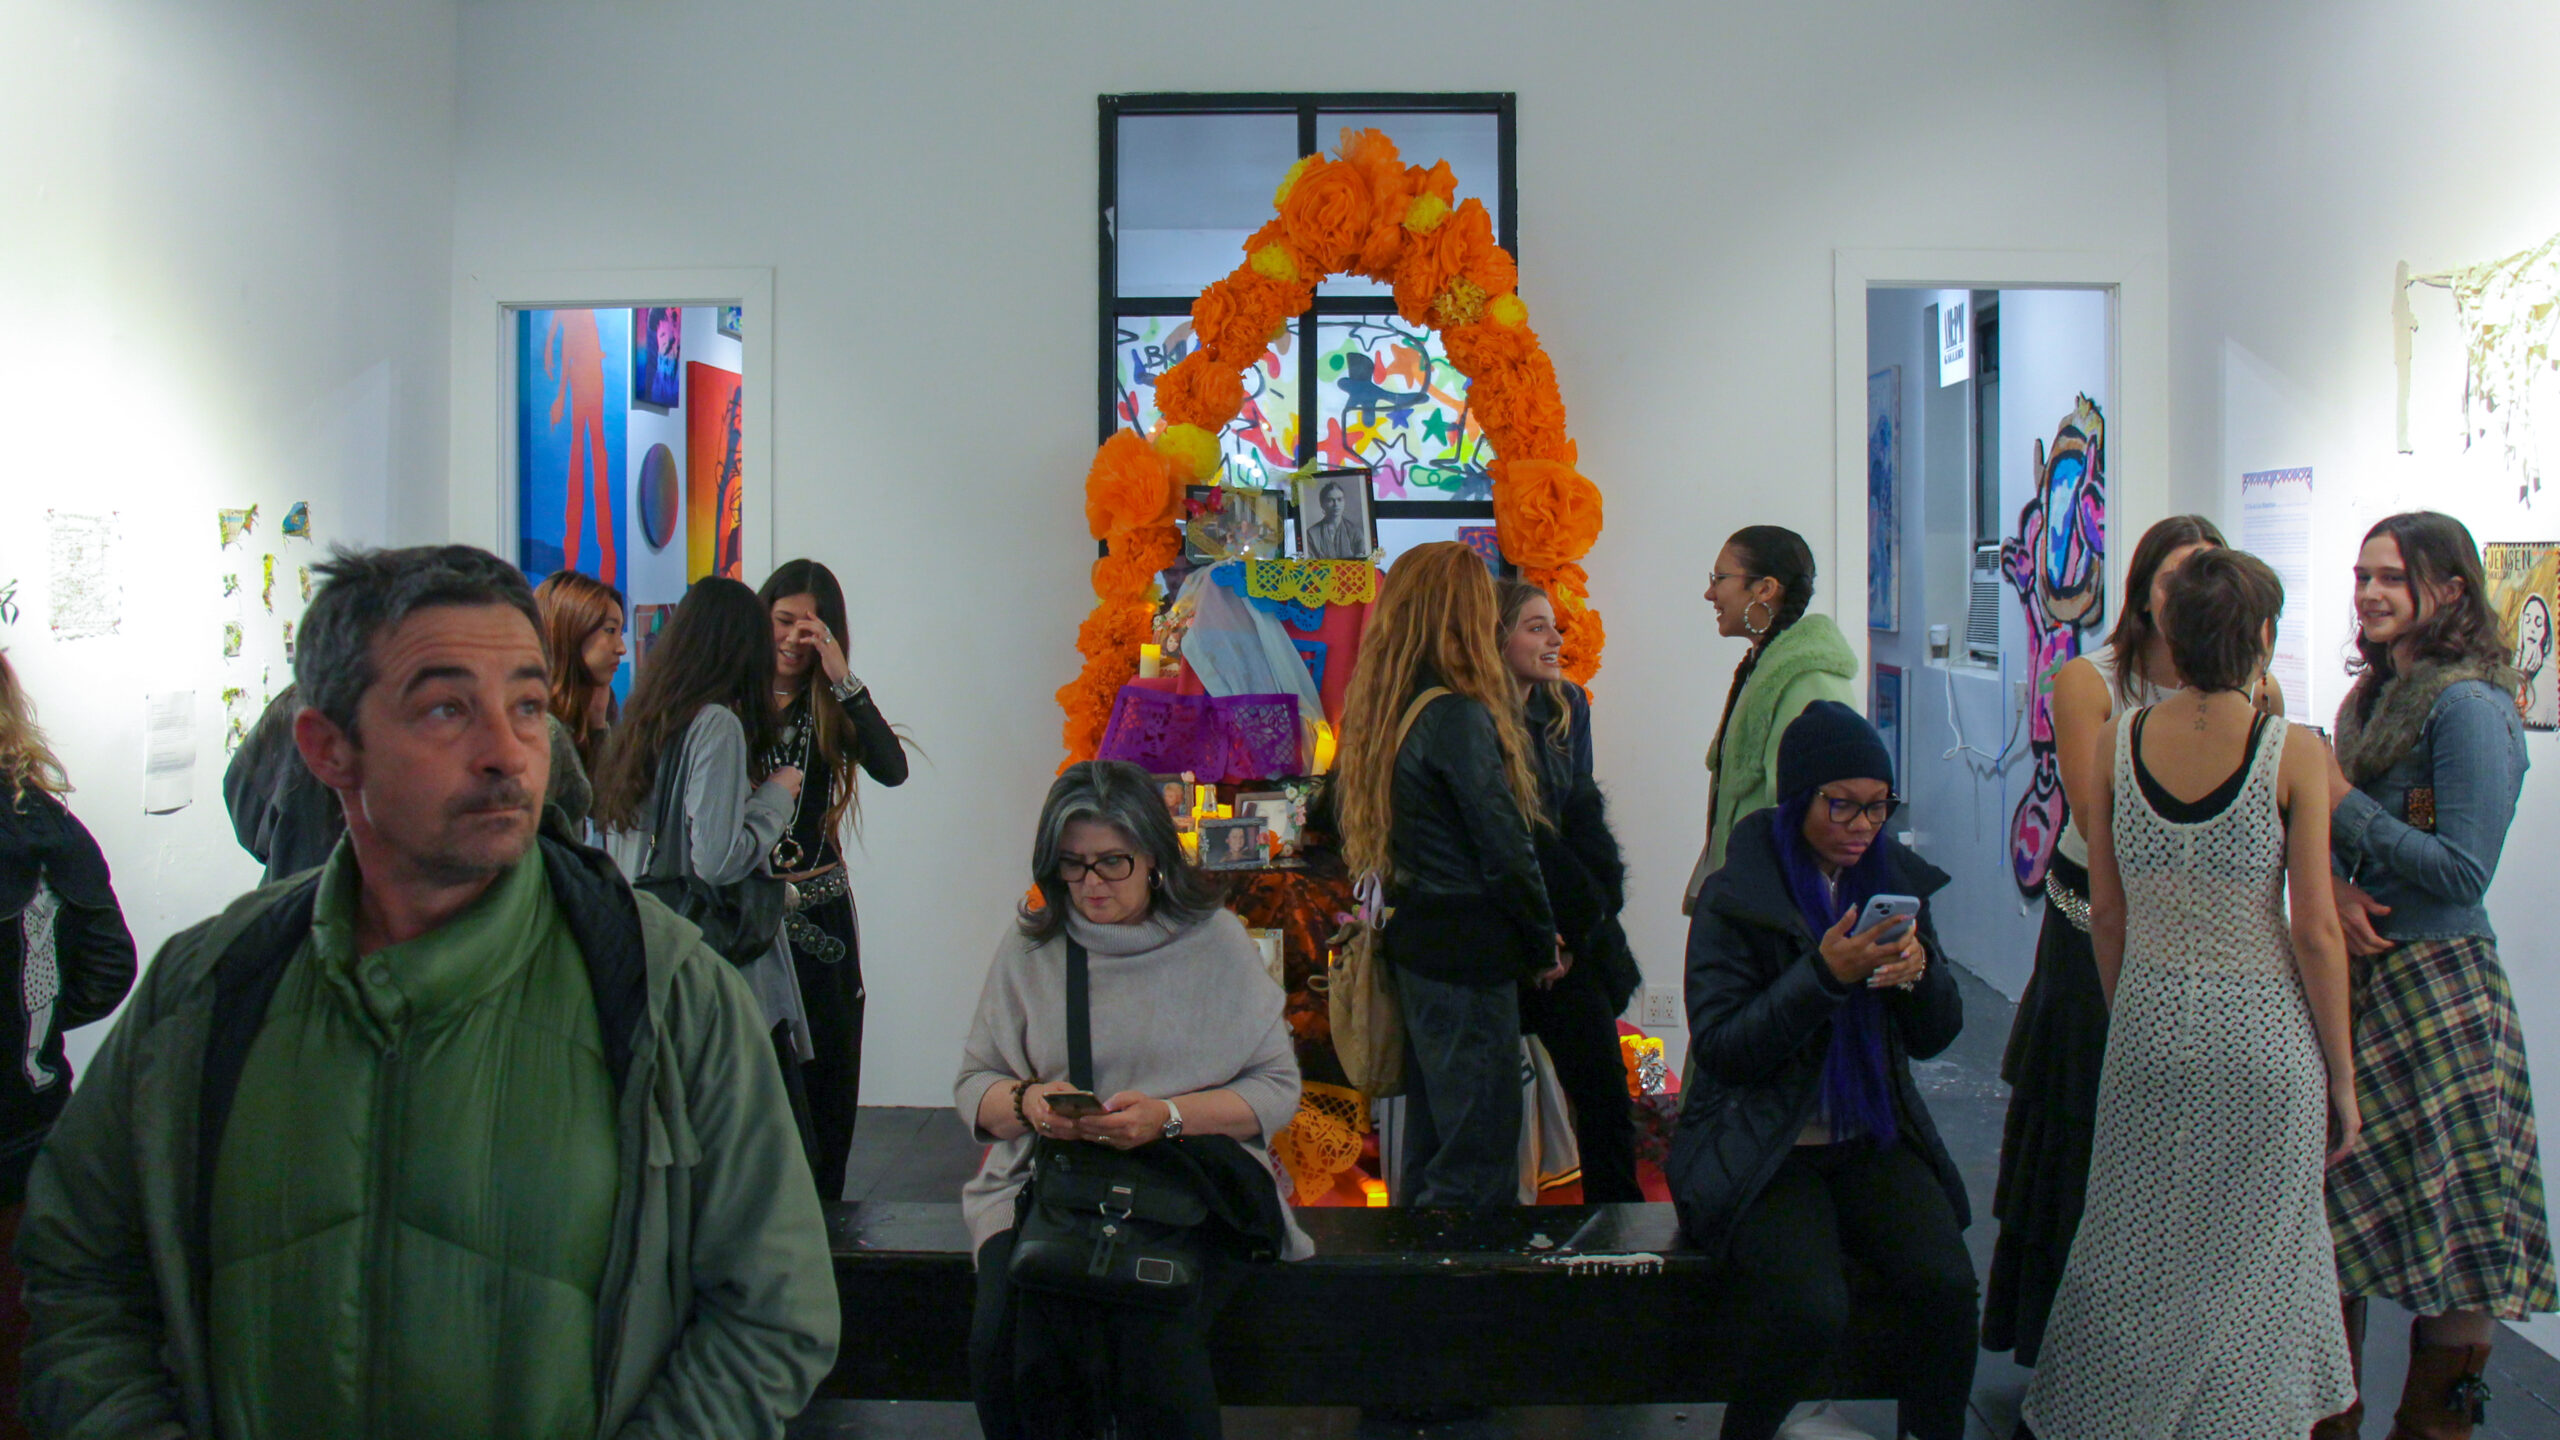 People stand talking in a gallery room with a colorful altar in the middle.